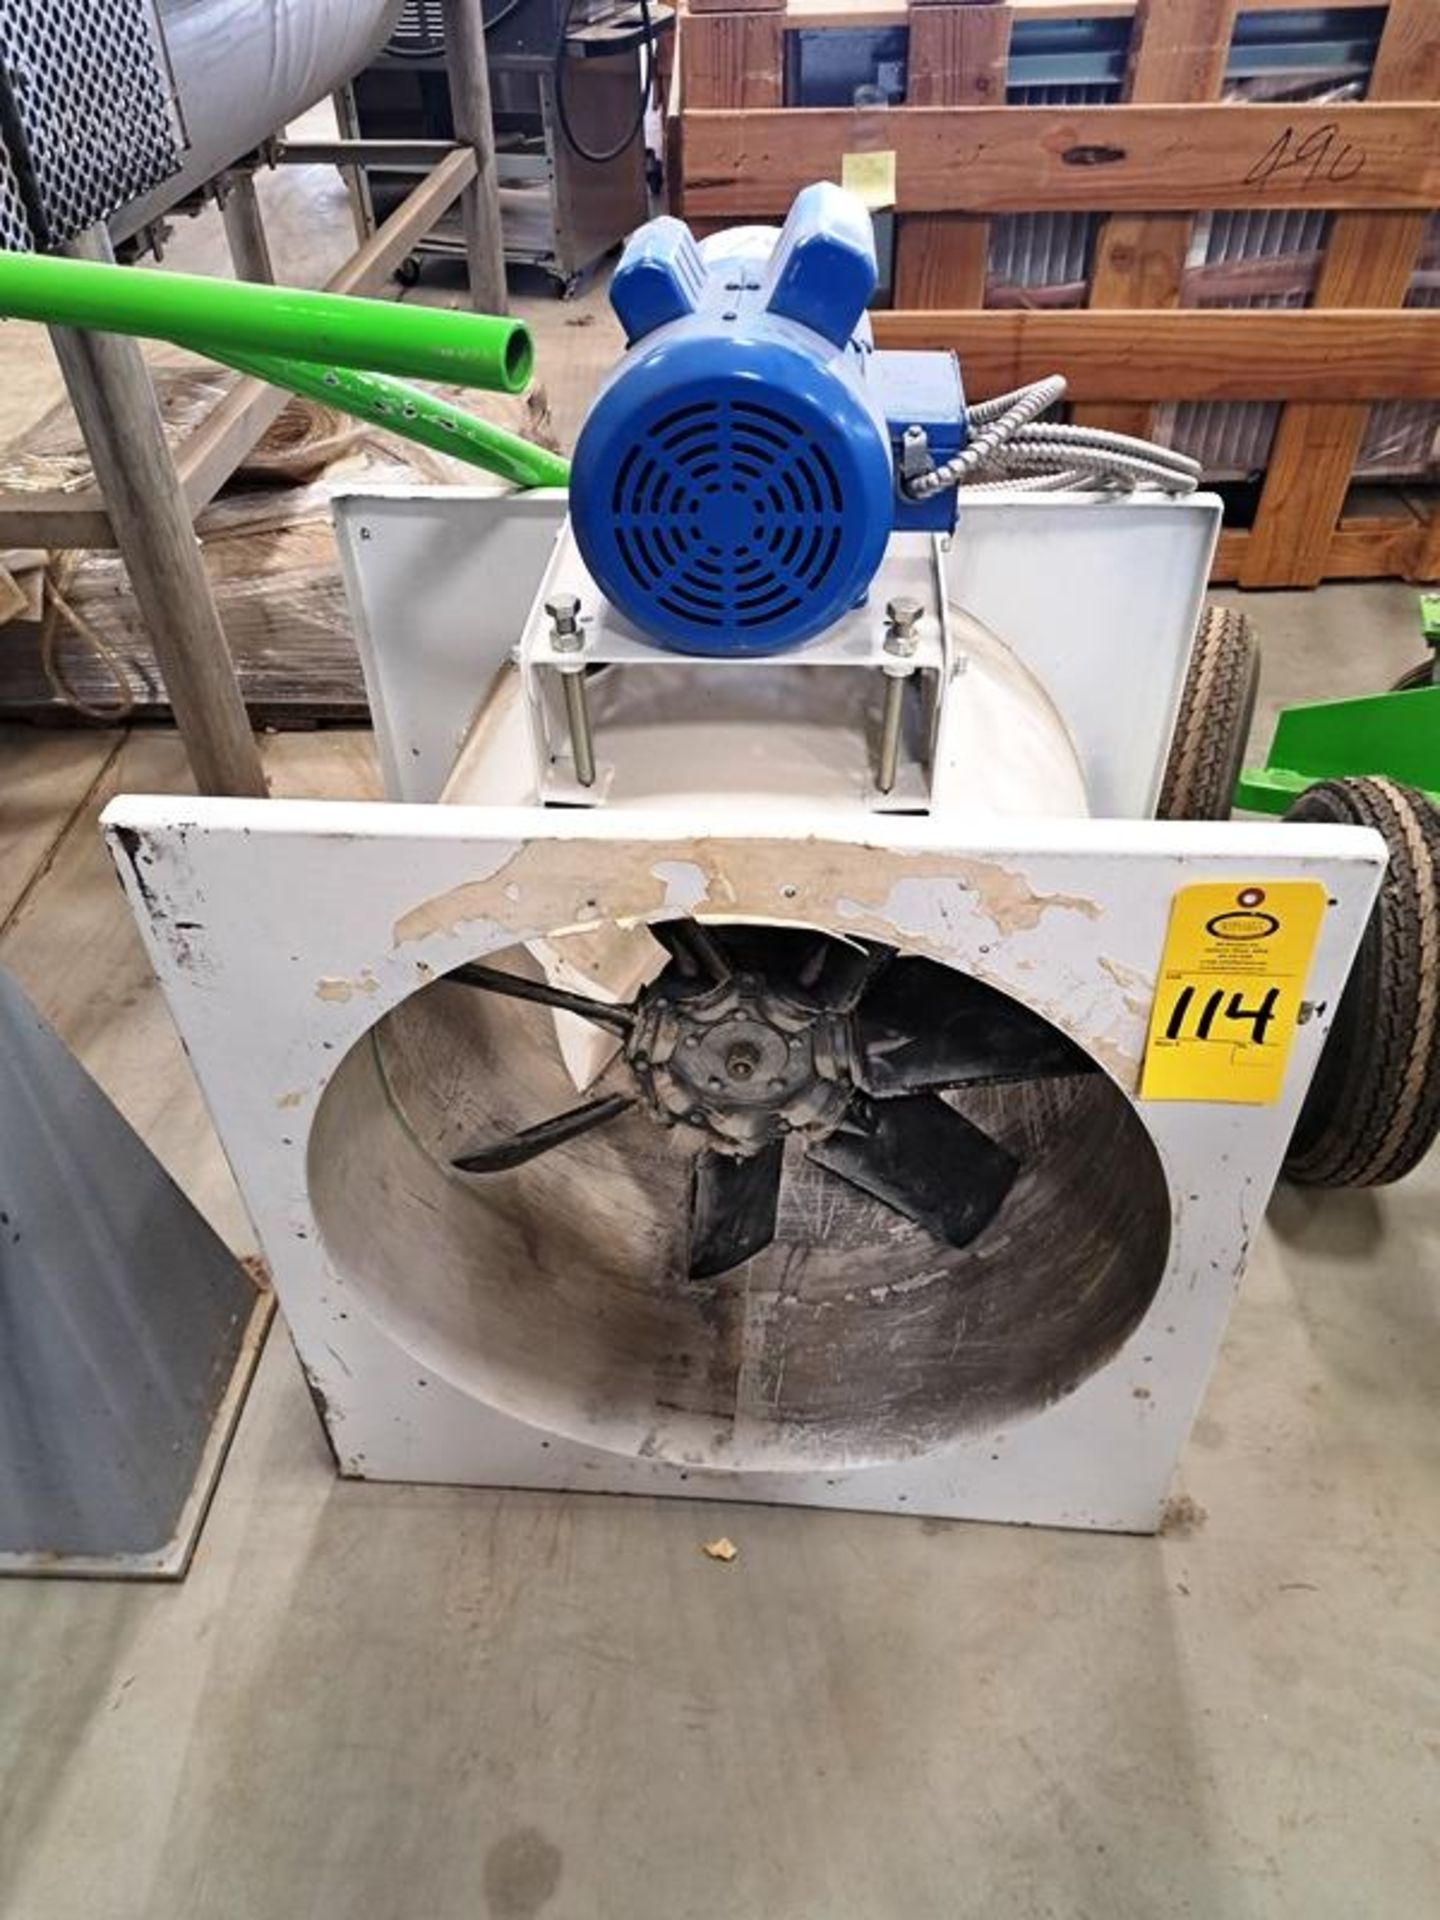 Paint Booth Exhaust Fan, 23" diameter, 2 h.p., 1 phase, 115 volts (Required Loading Fee: $25.00)